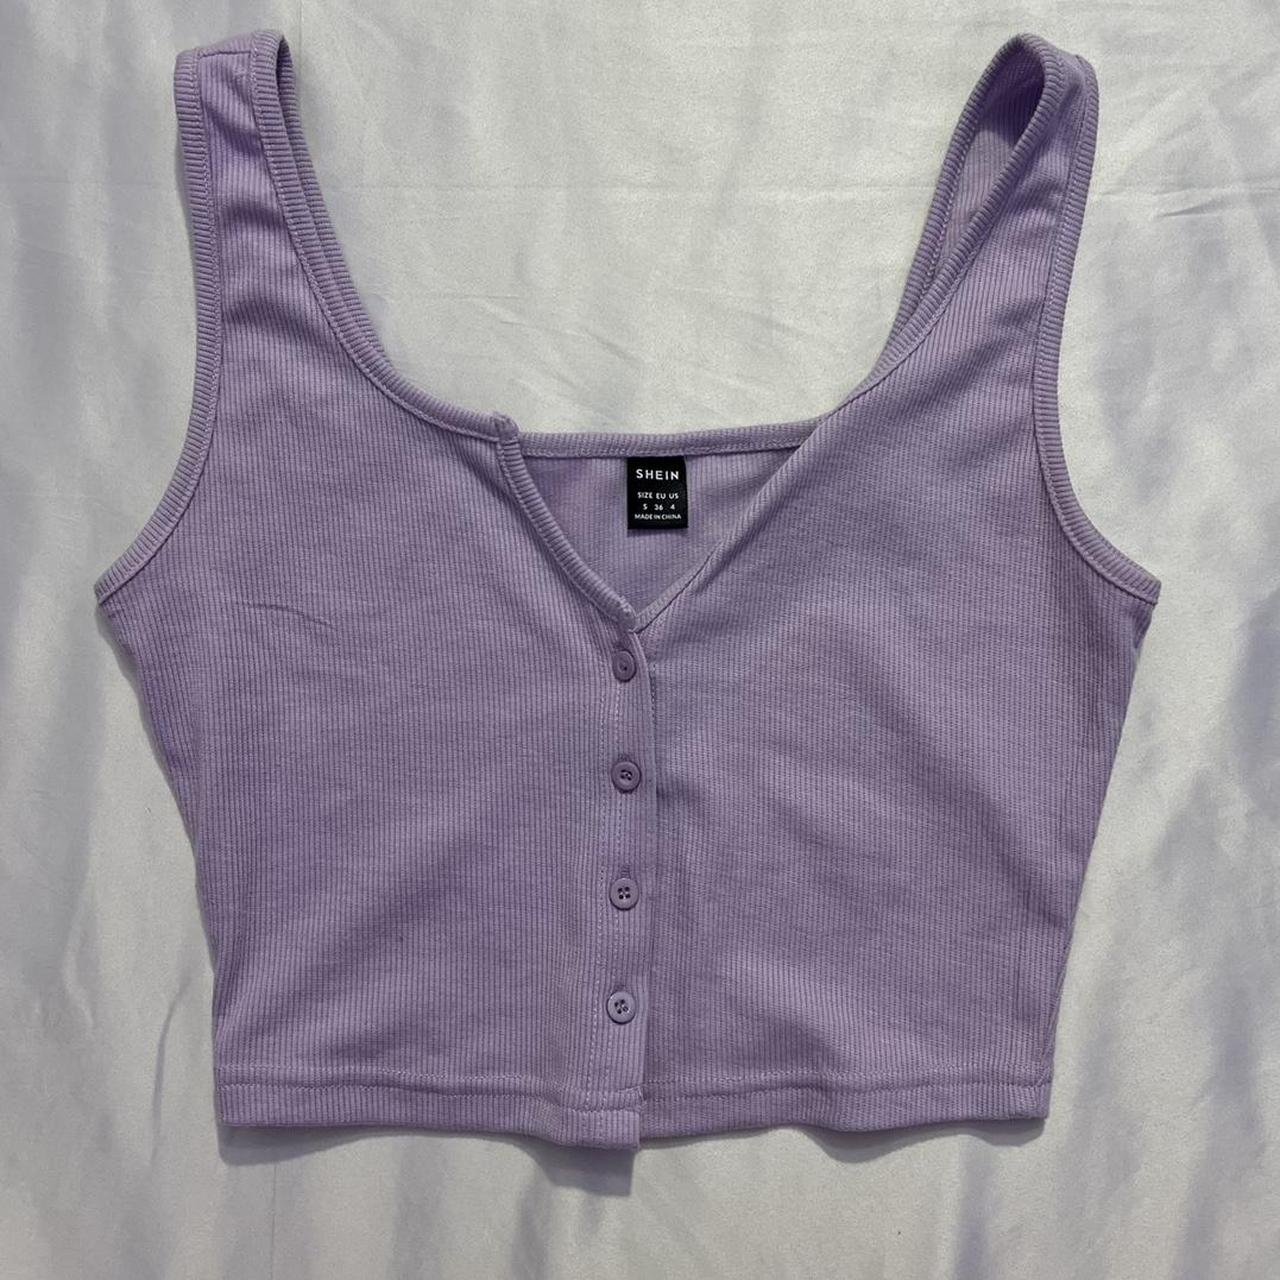 shein mauve athletic top size small #shein - Depop